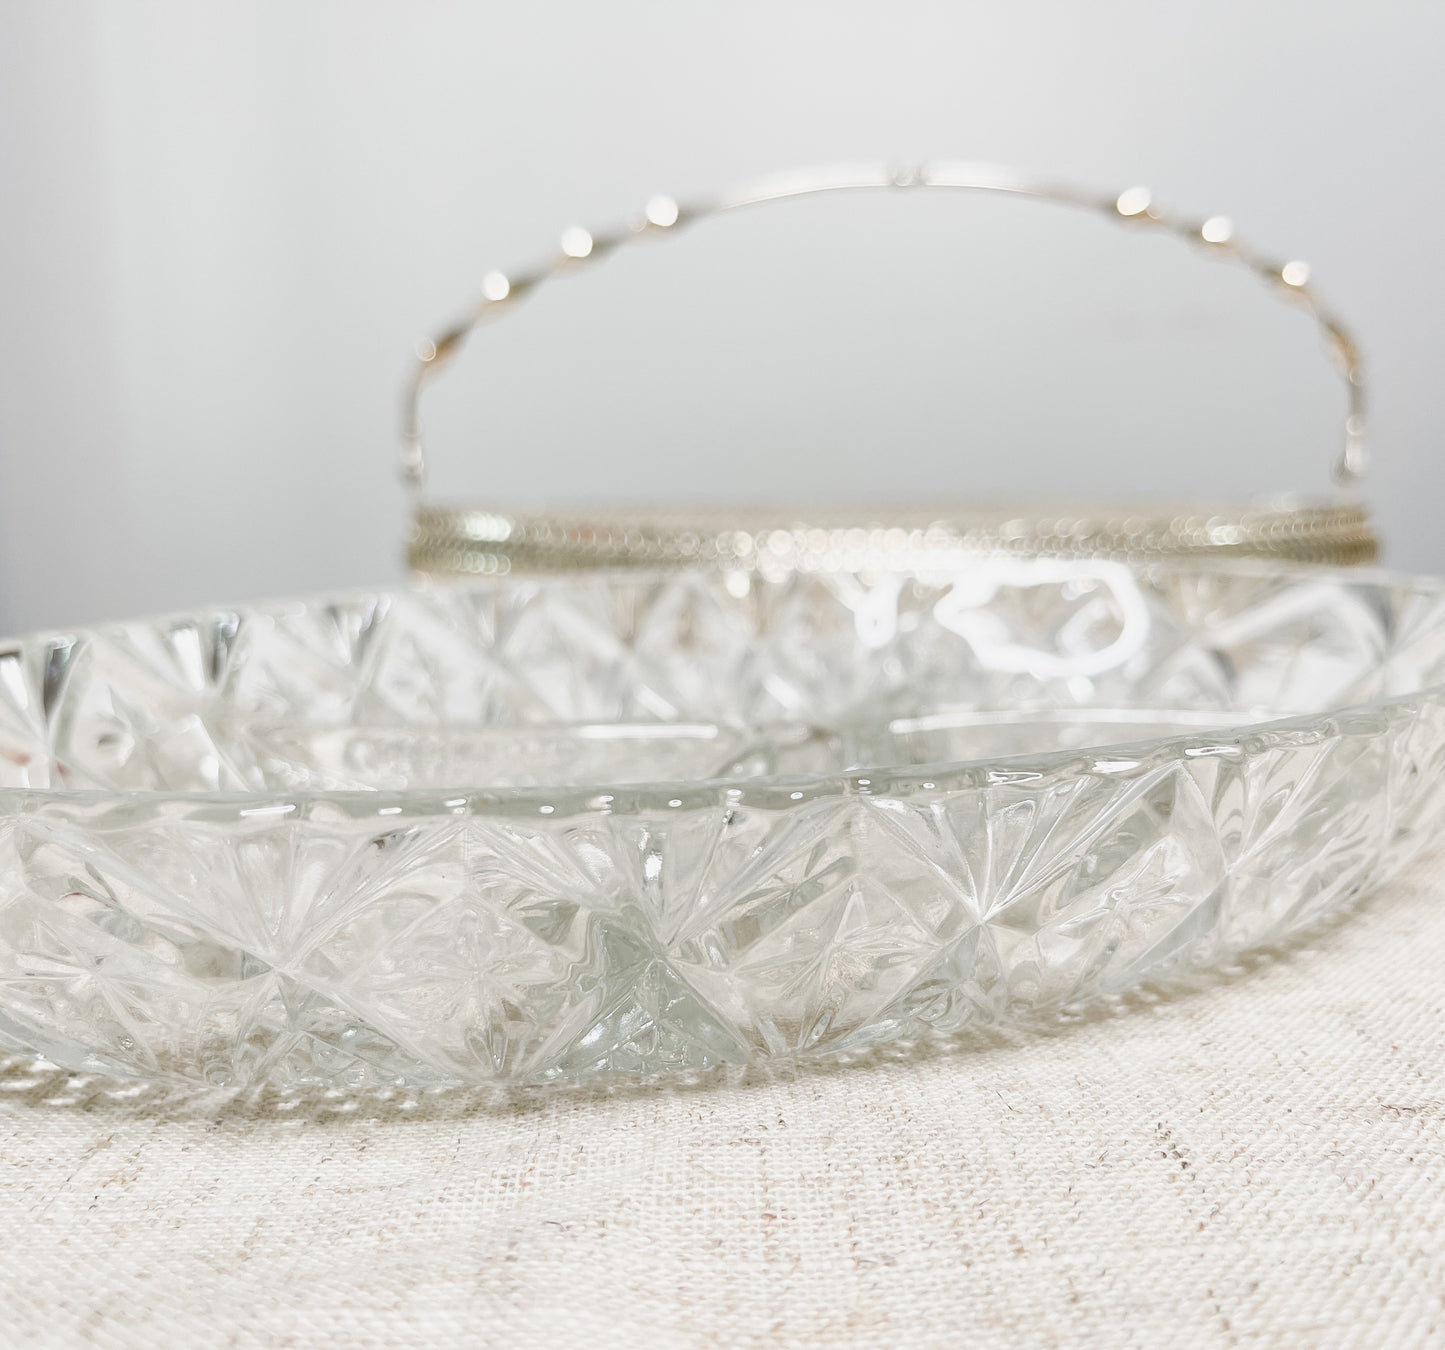 Crystal serving dish with metal holder